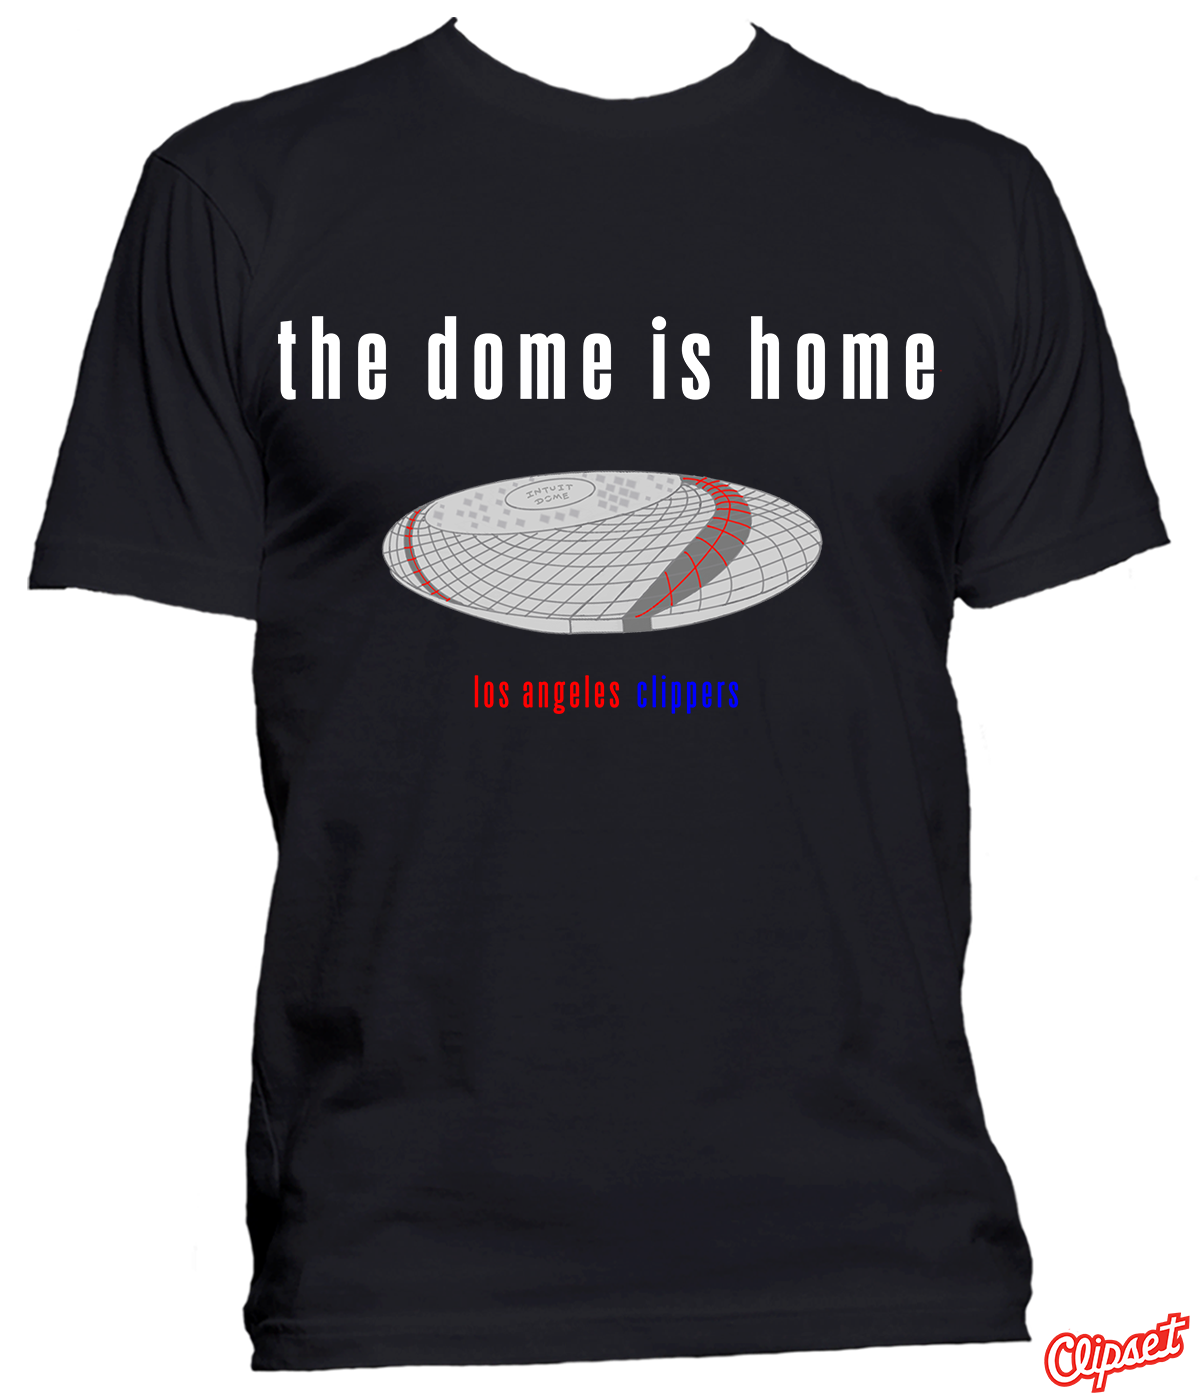 The Dome is Home Tee